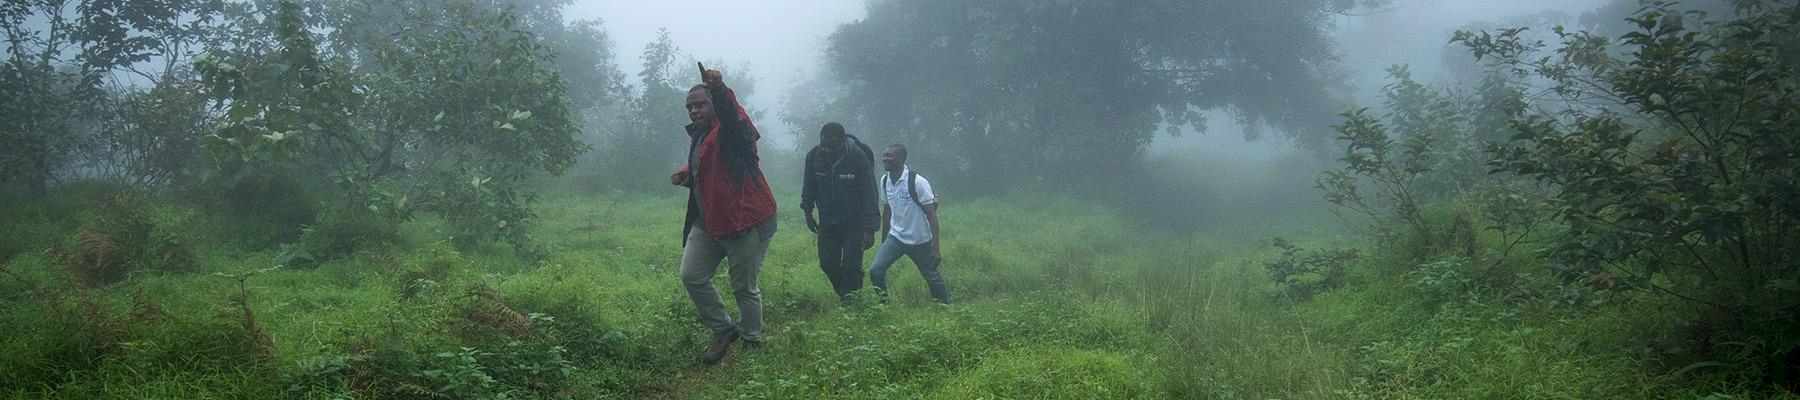 TRAFFIC staff in the National Park at the base of Mount Cameroon, Cameroon